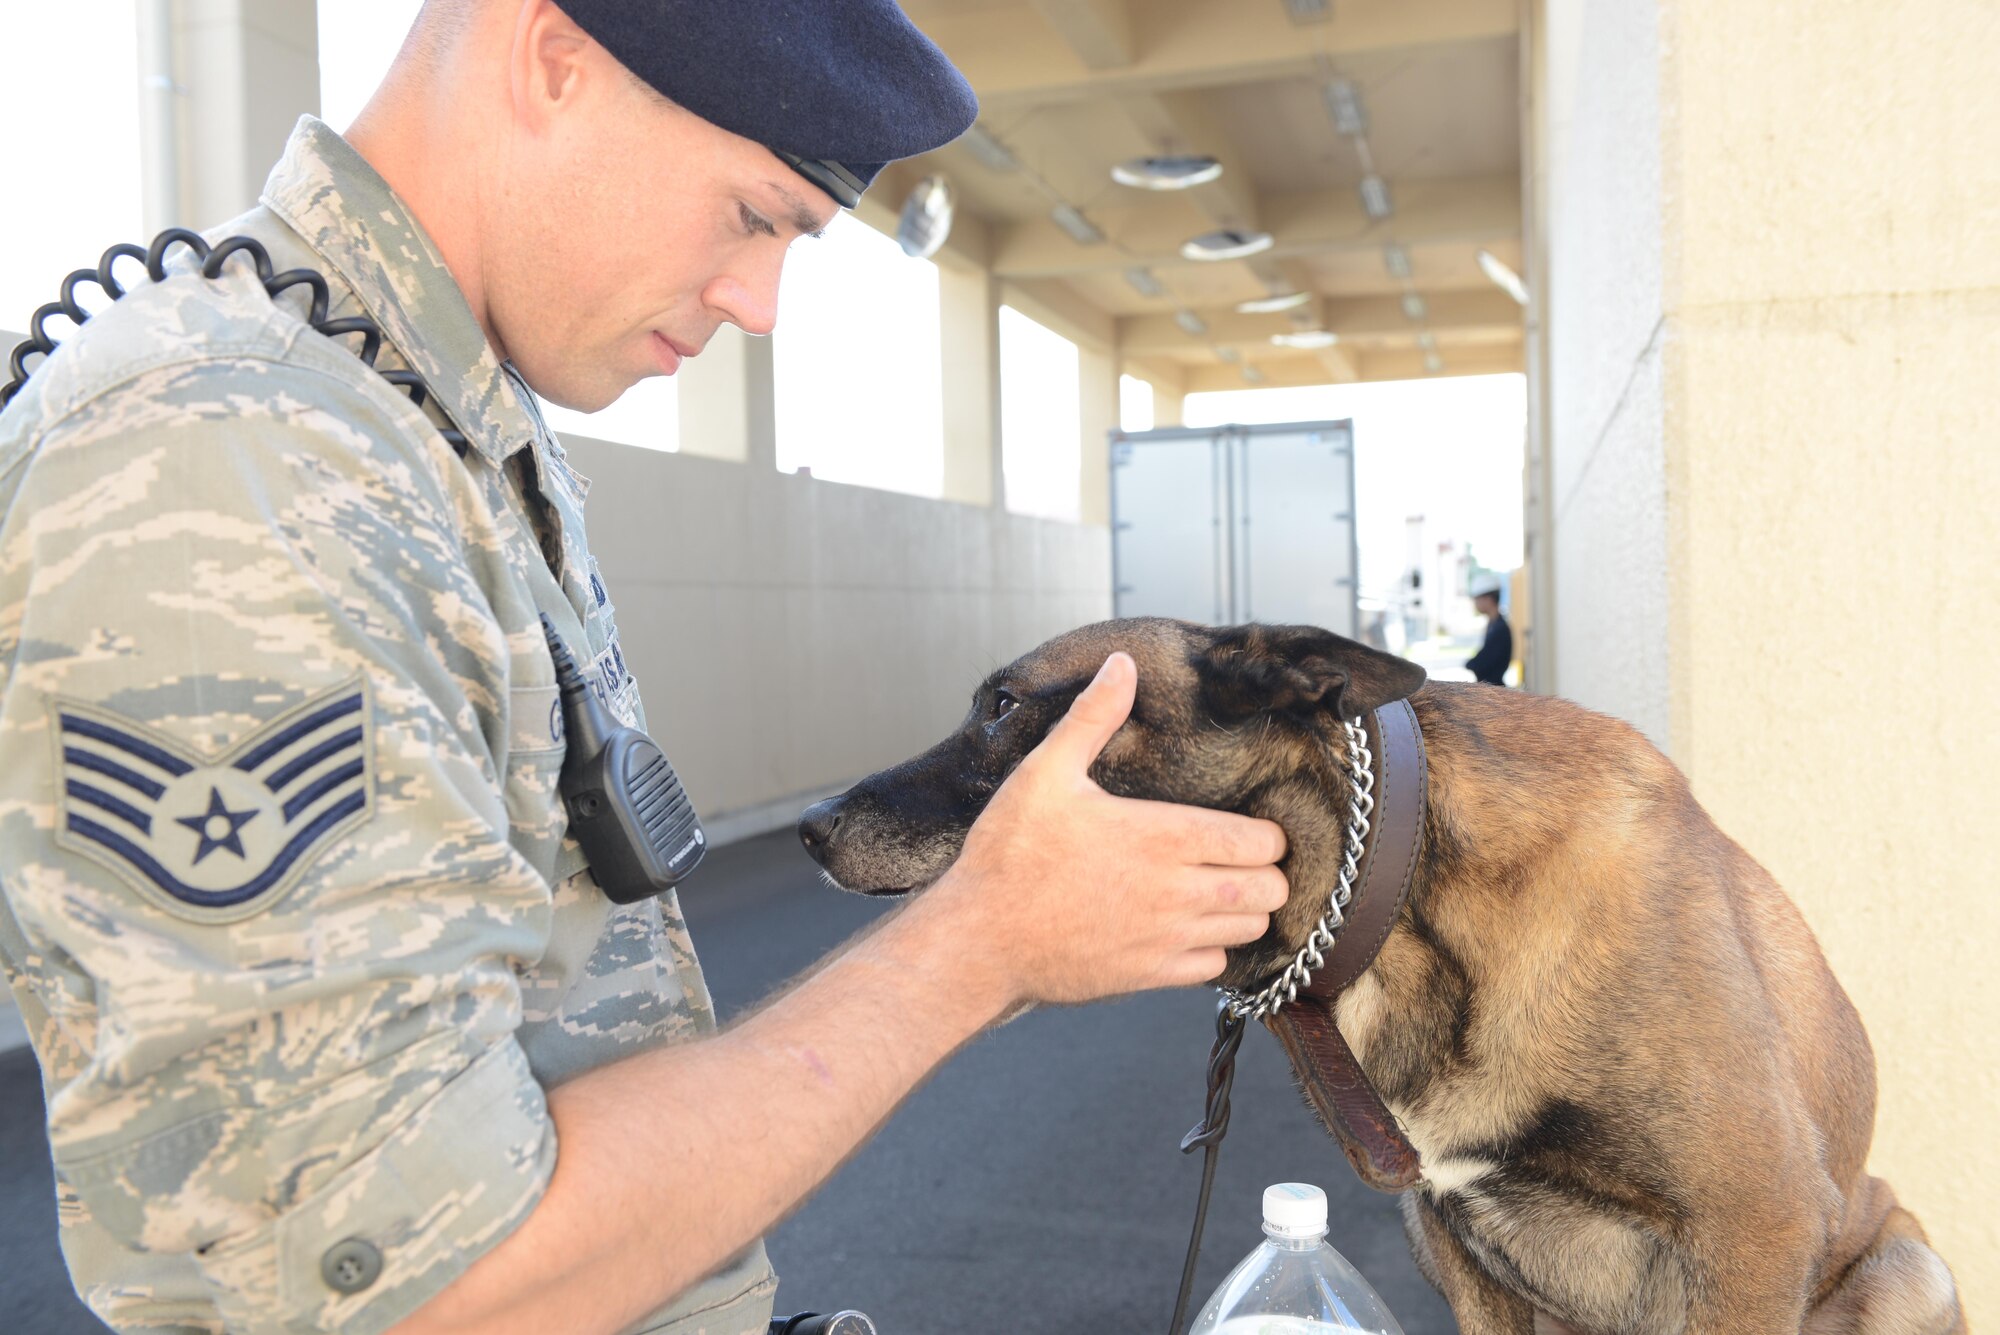 Staff Sgt. Nicholas Galbraith, a 374th Security Forces Squadron military working dog handler, praises his MWD partner, Topa, after performing vehicle checks at Yokota Air Base, Japan, July 24, 2015. Positive reinforcement is one of the primary means of training MWDs and encouraging good behavior. (U.S. Air Force photo/Airman 1st Class David C. Danford)